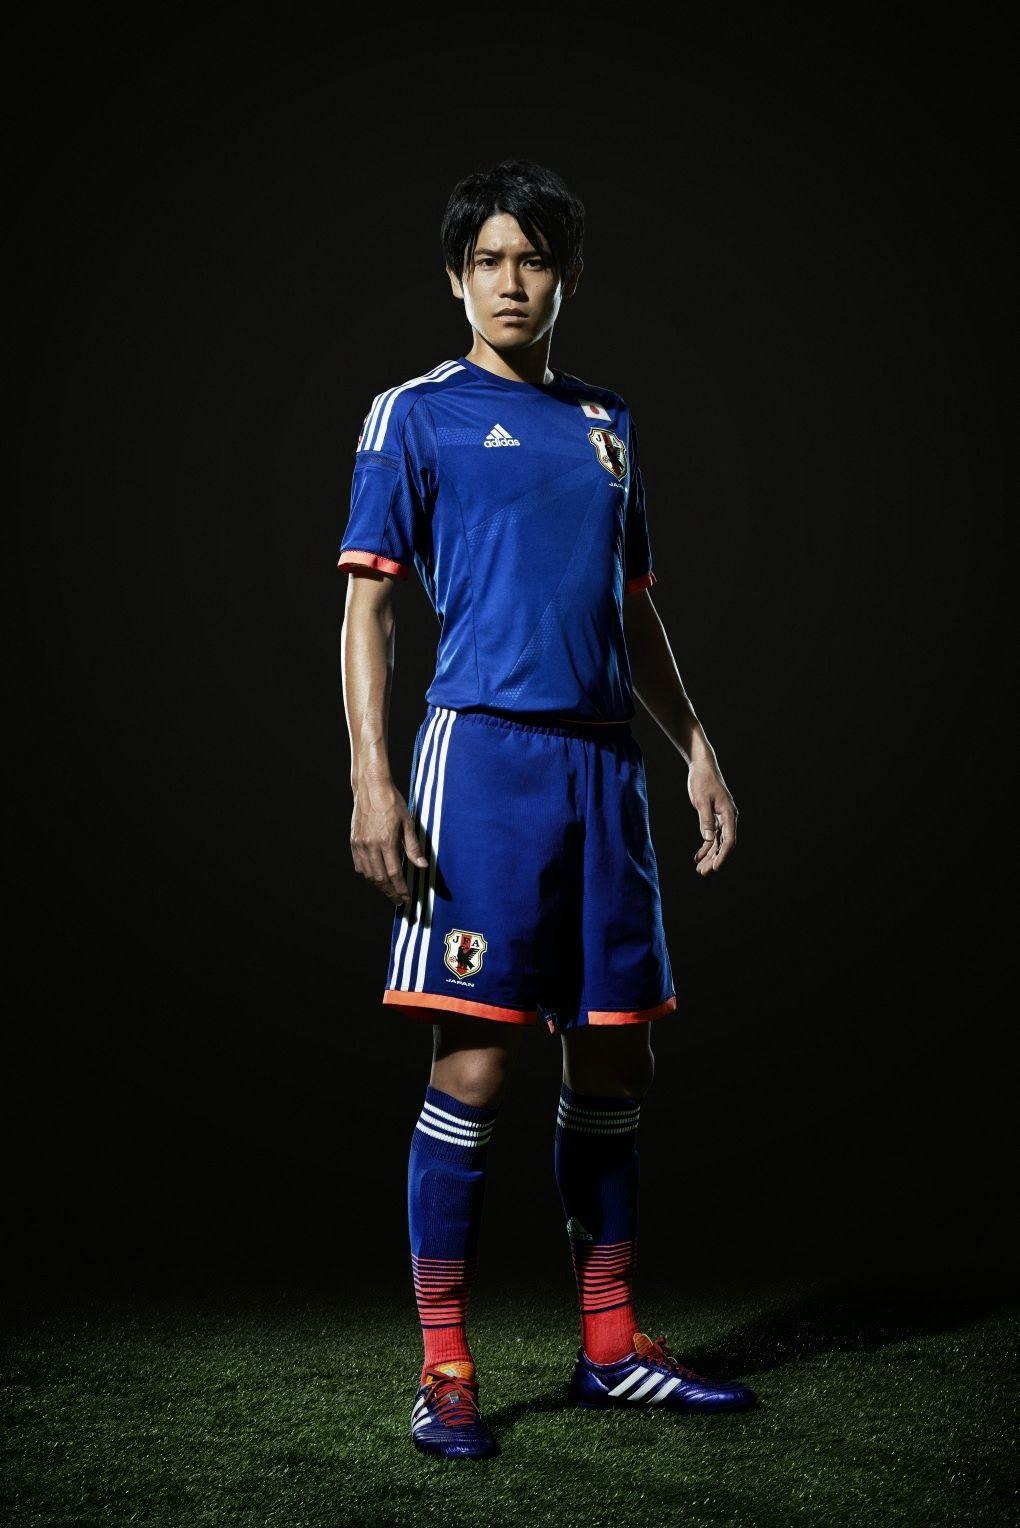 Adidas launch the Japan kit for 2014 FIFA World Cup